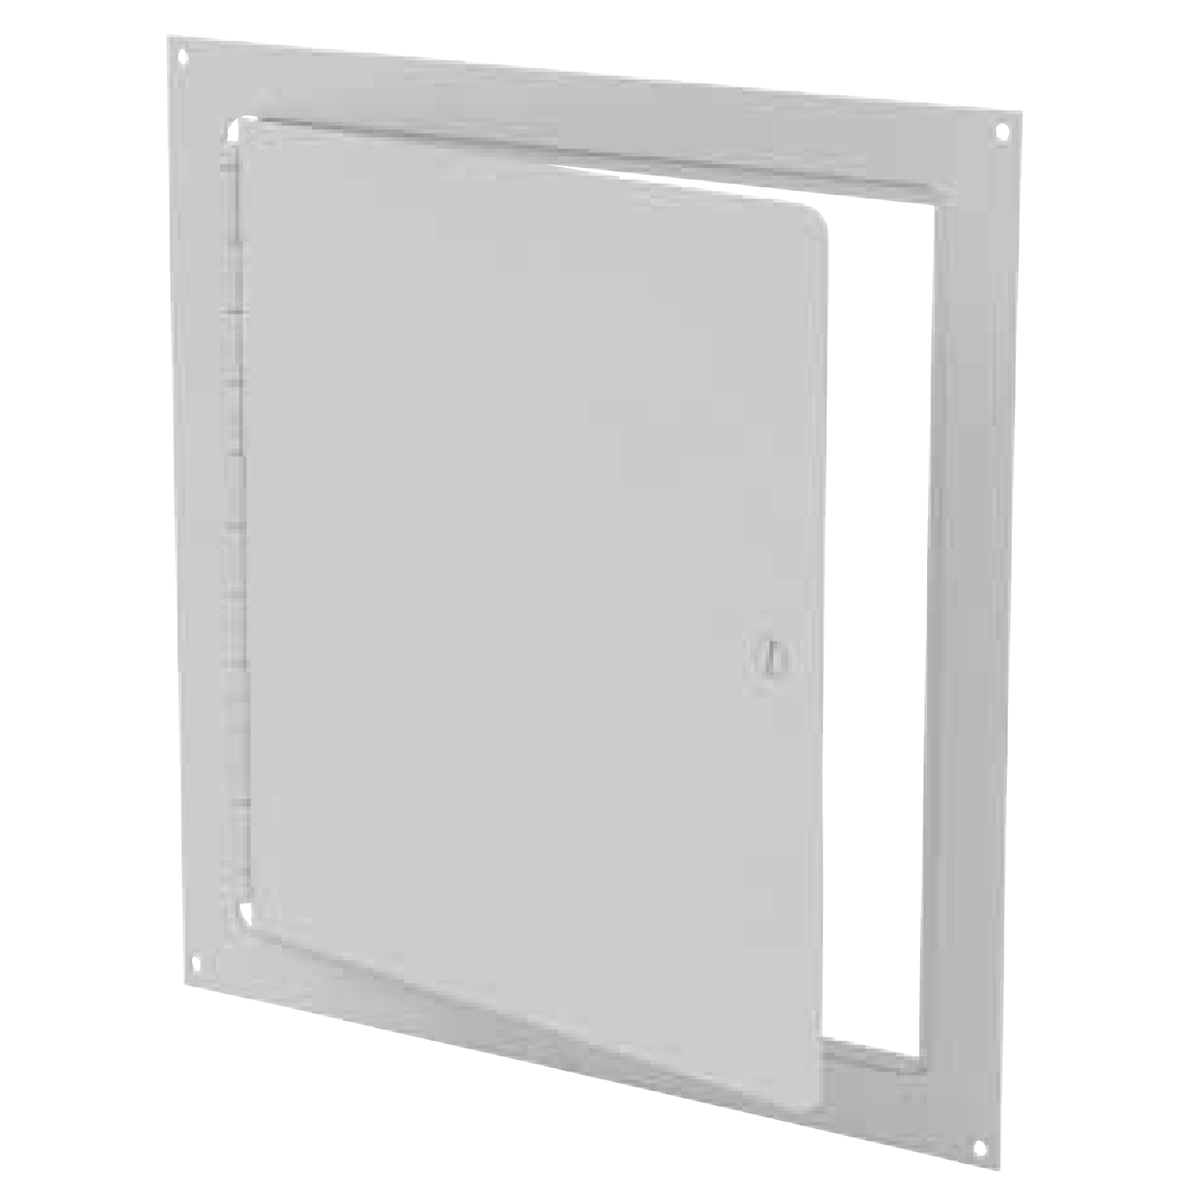 Access Door - E-SF 14x14 Surface Mount, Primer Coated Steel